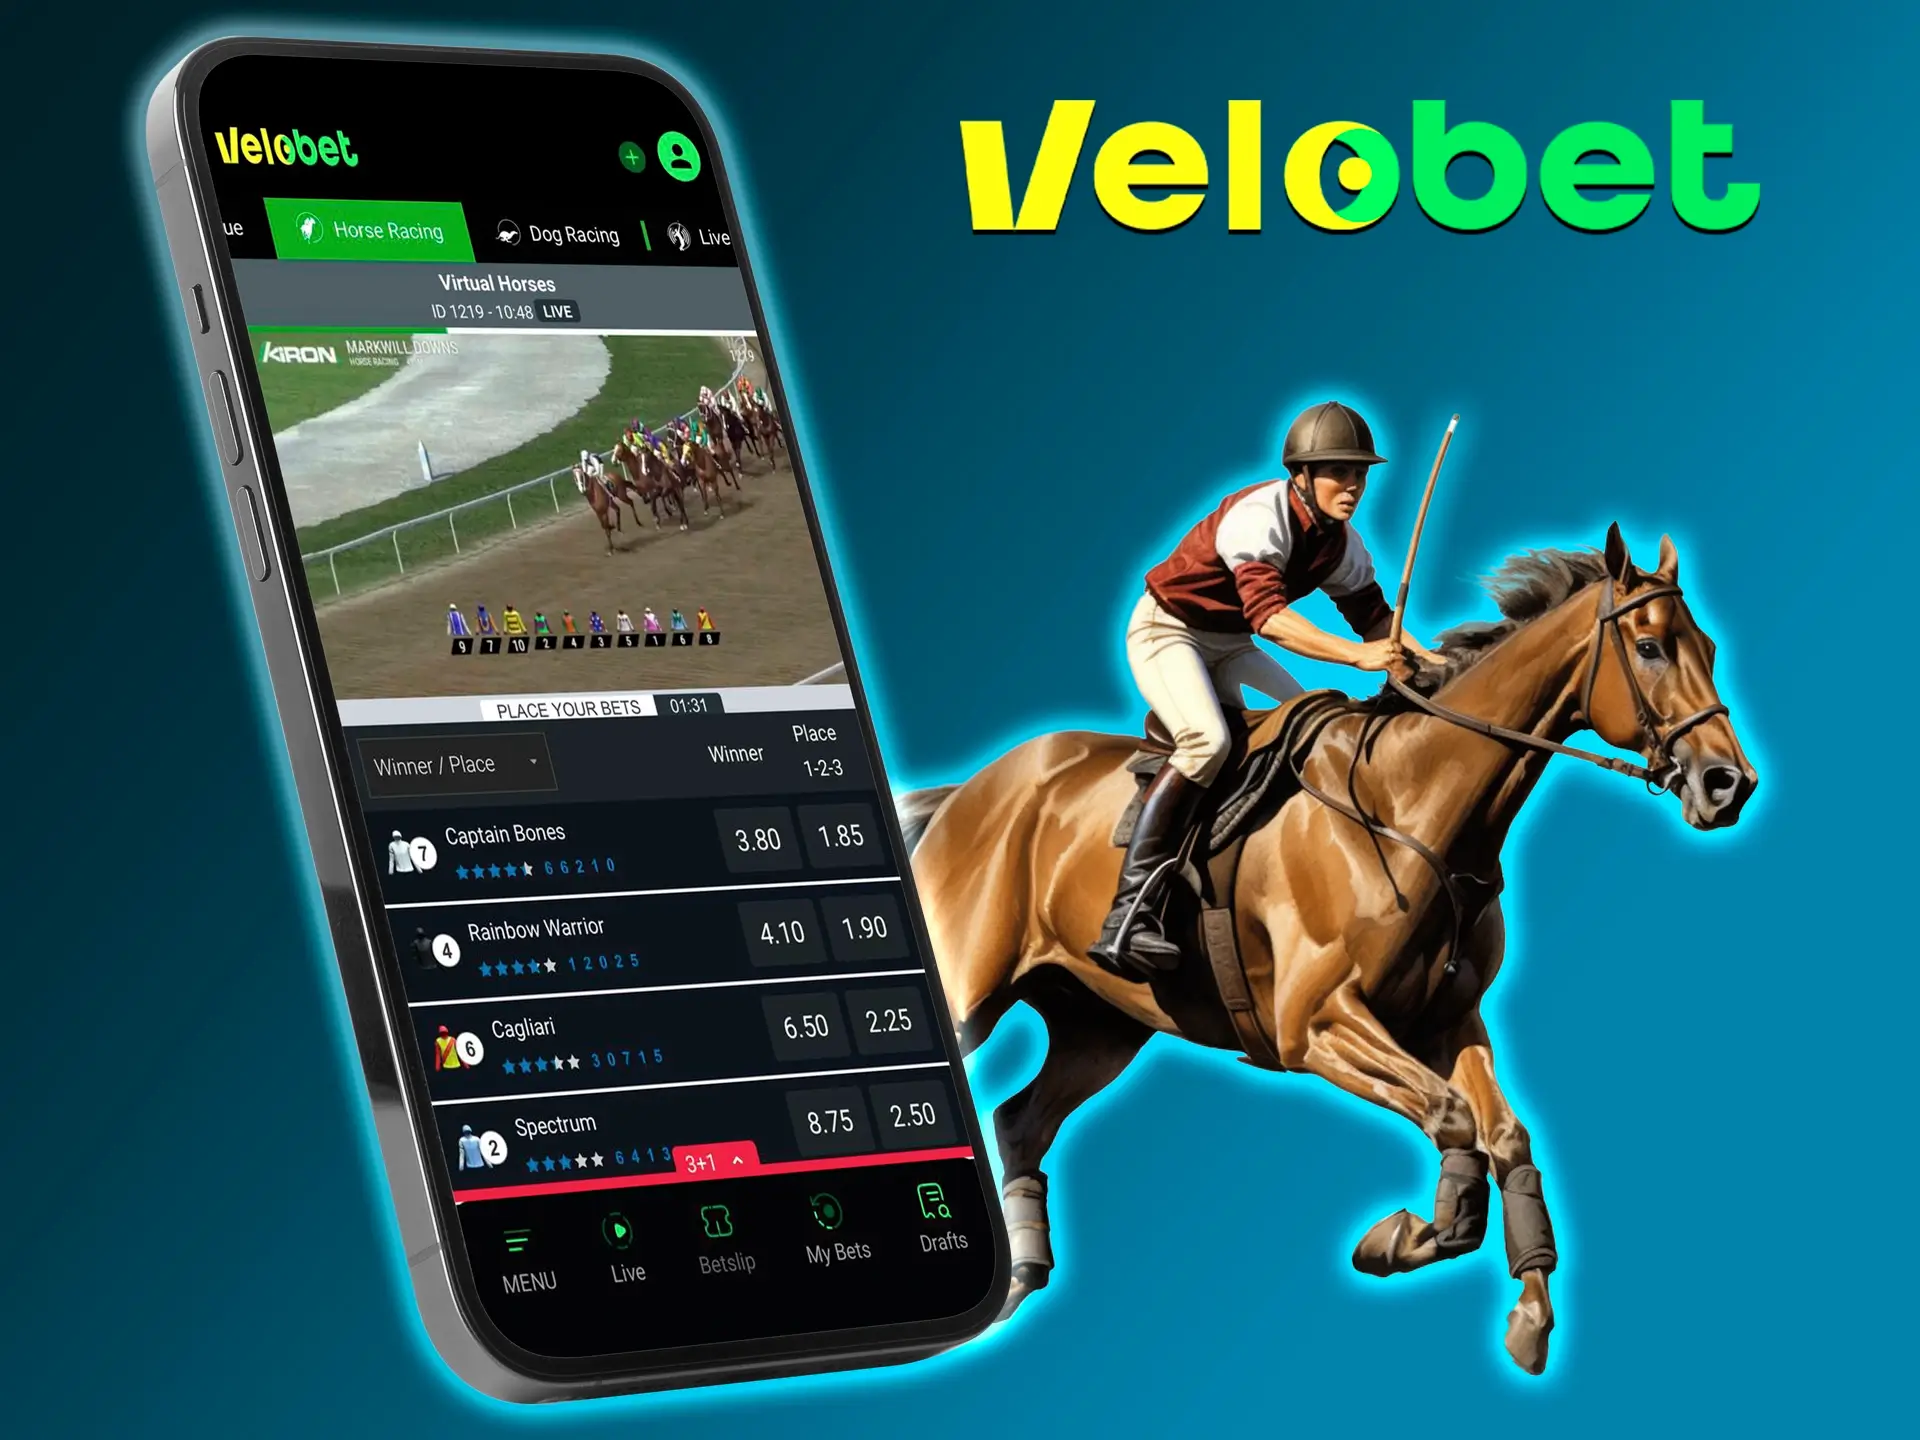 In the Velobet app you can bet on a virtual match while you wait for the real confrontation.